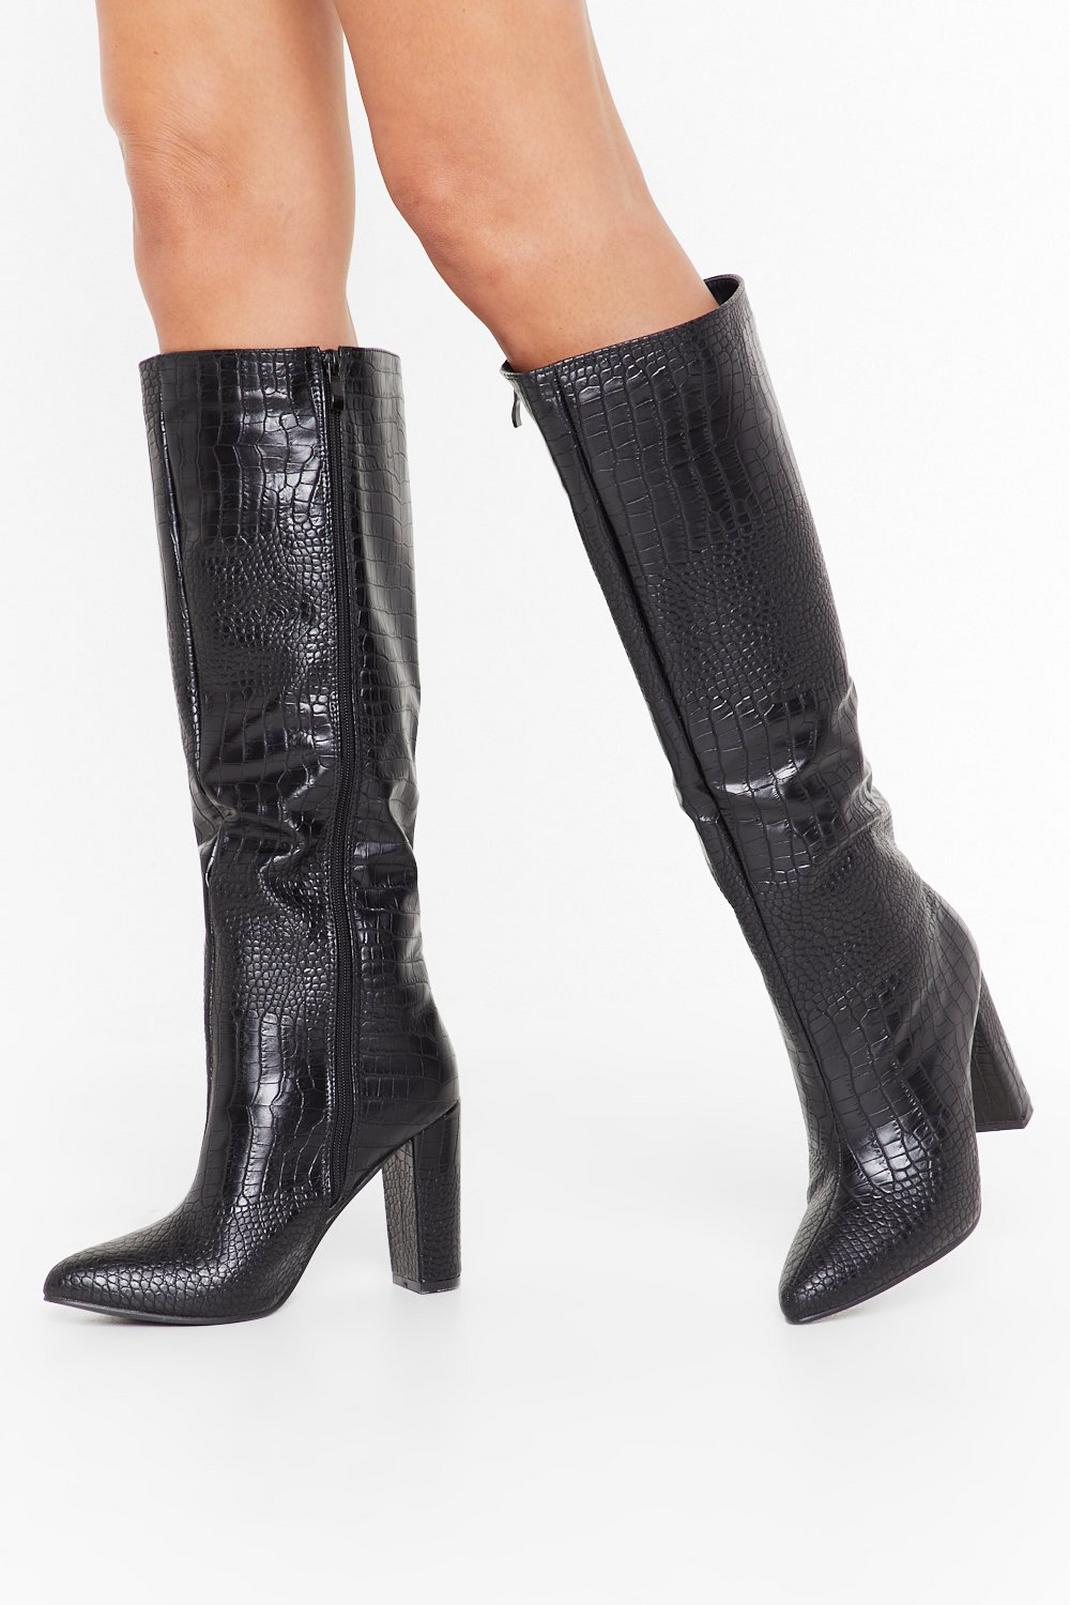 Croc Our World Faux Leather Knee-High Boots image number 1